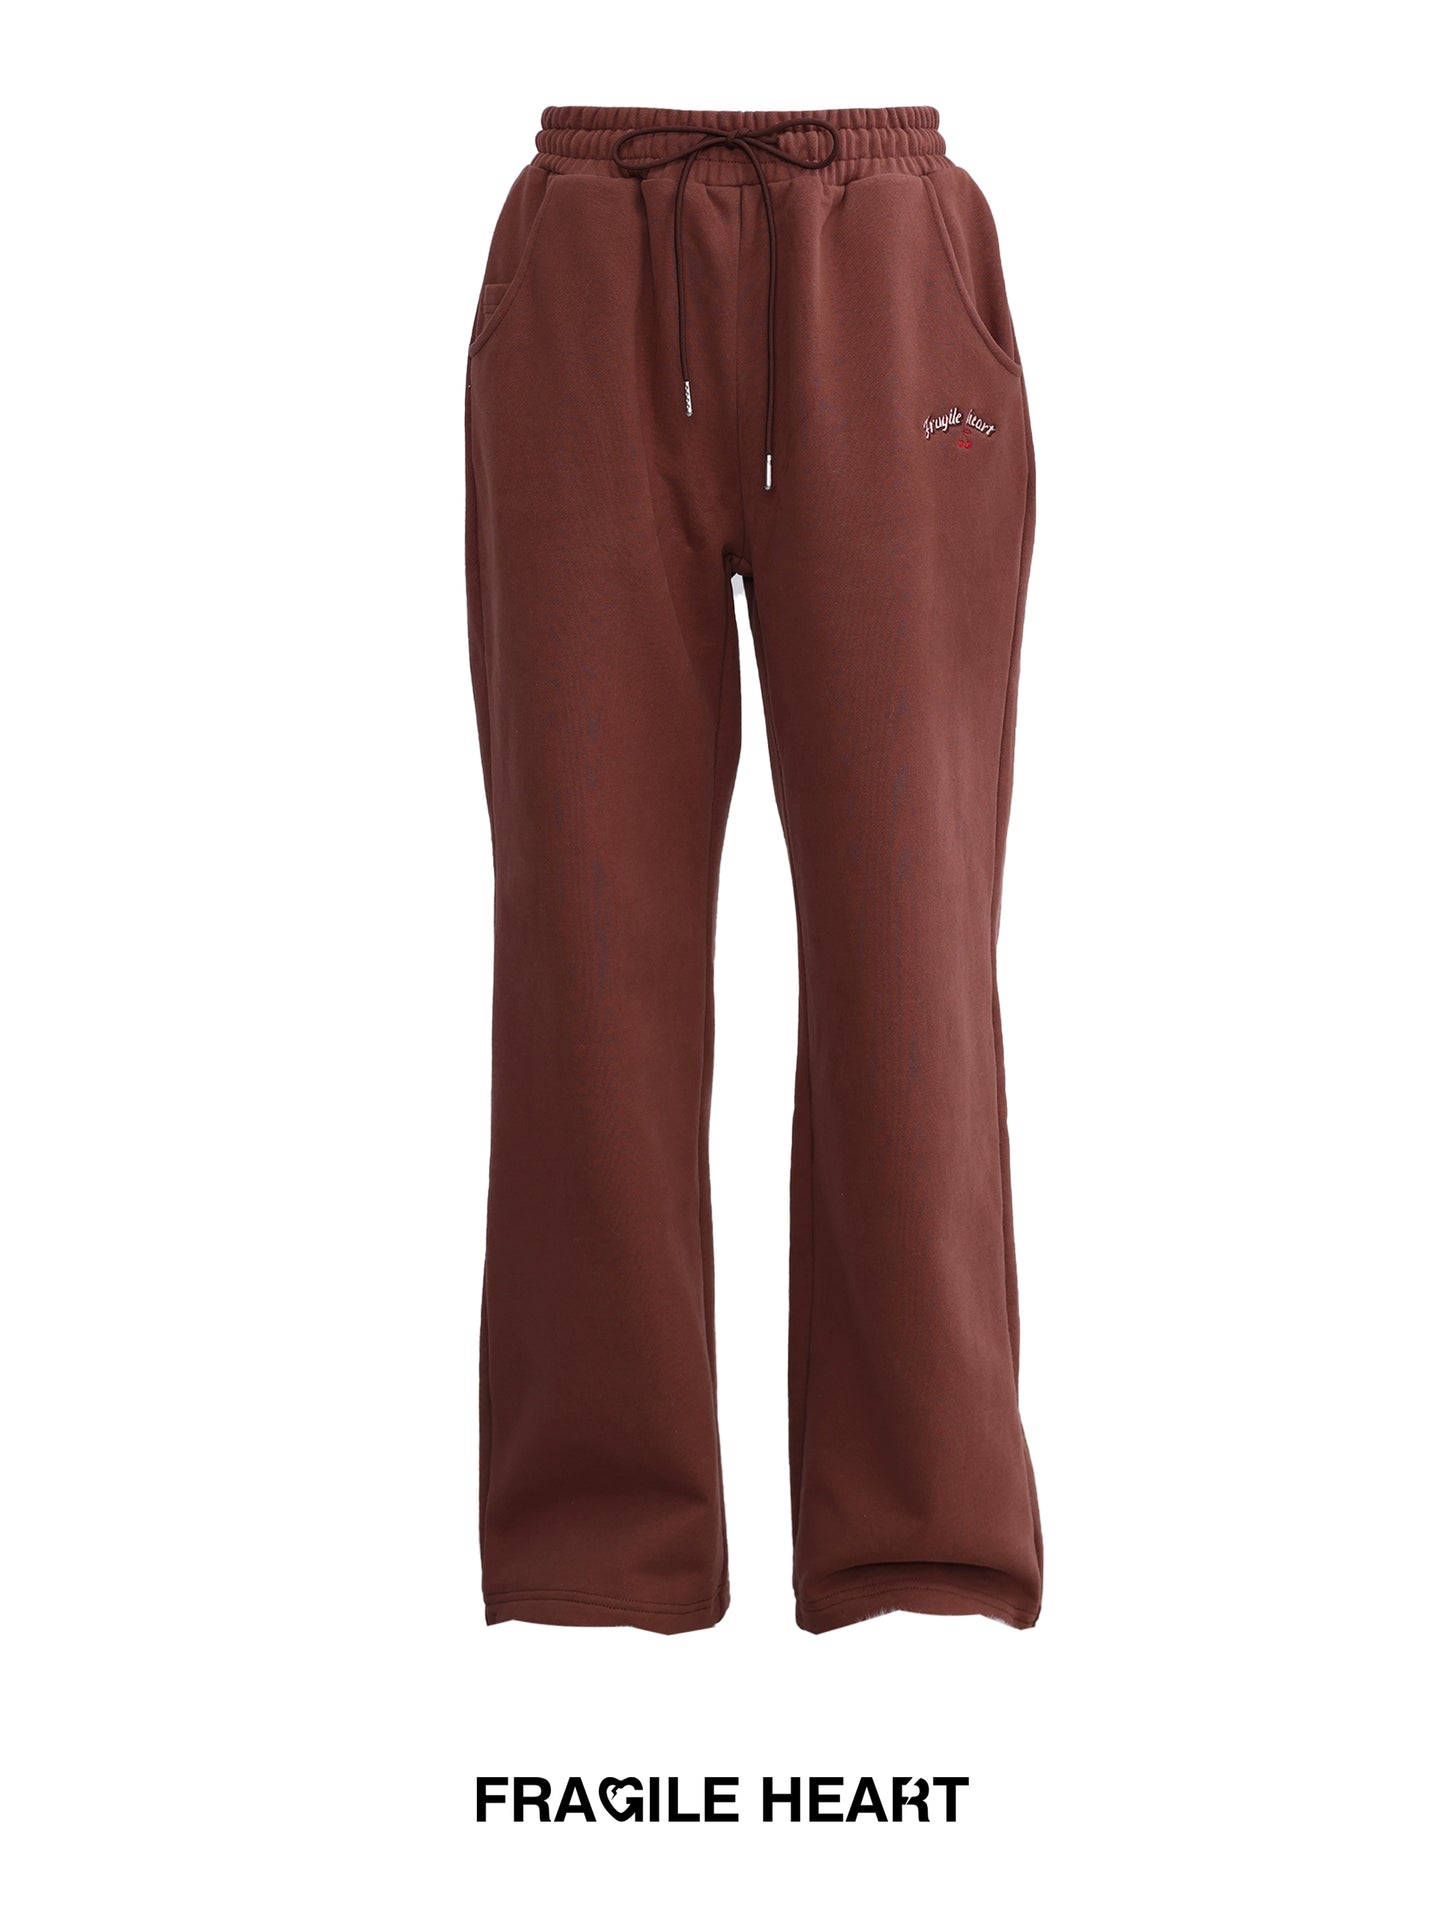 Sweet Cool Girl Casual College Pants